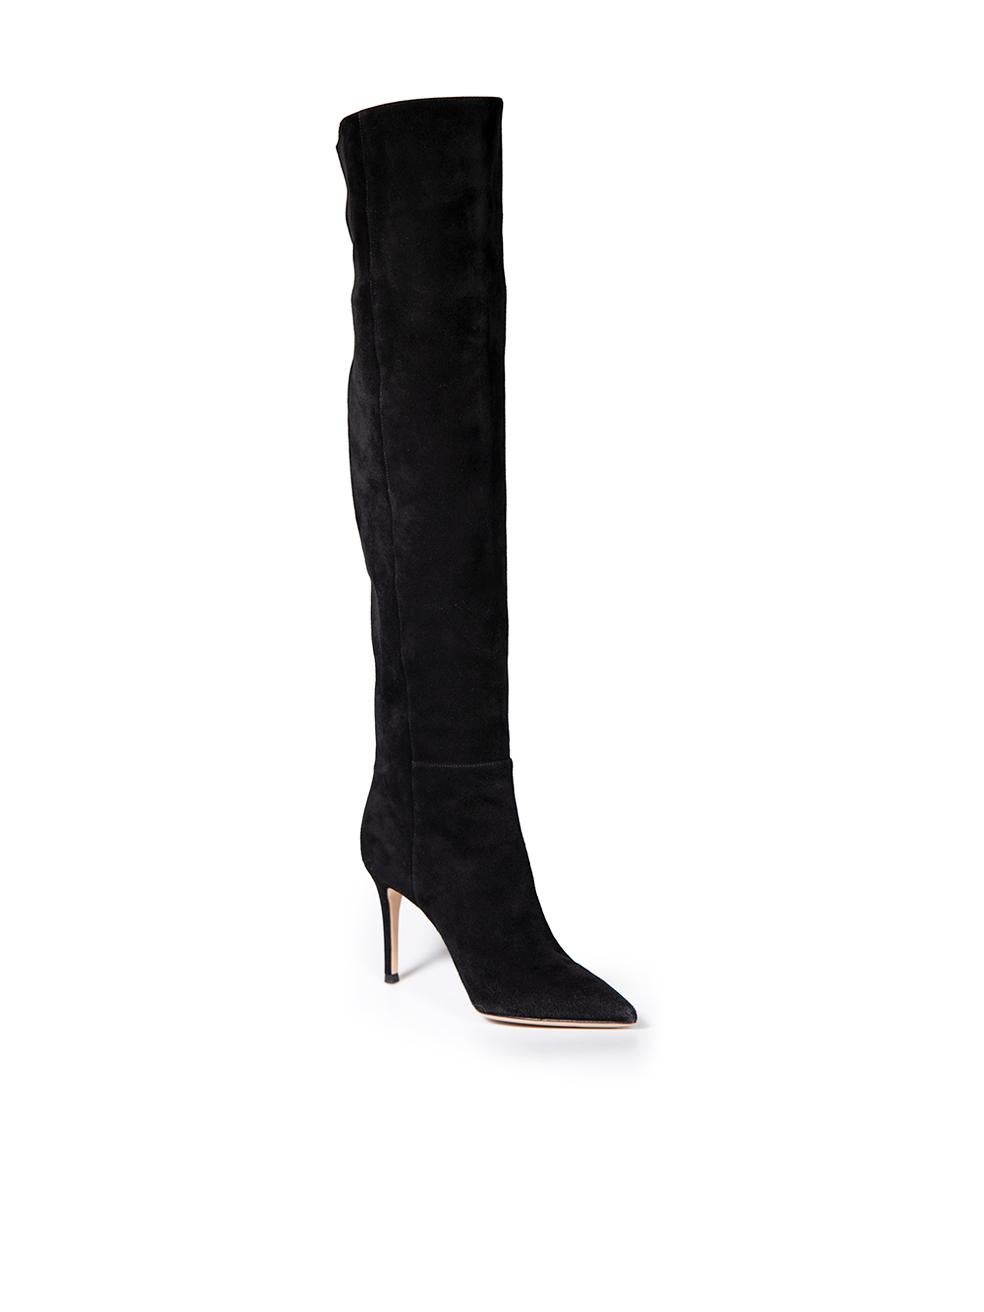 CONDITION is Never worn. No visible wear to boots is evident on this new Gianvito Rossi designer resale item, however the toes of both have very light abrasions due to poor storage. These boots come with original dust bag.
 
 
 
 Details
 
 
 Black
